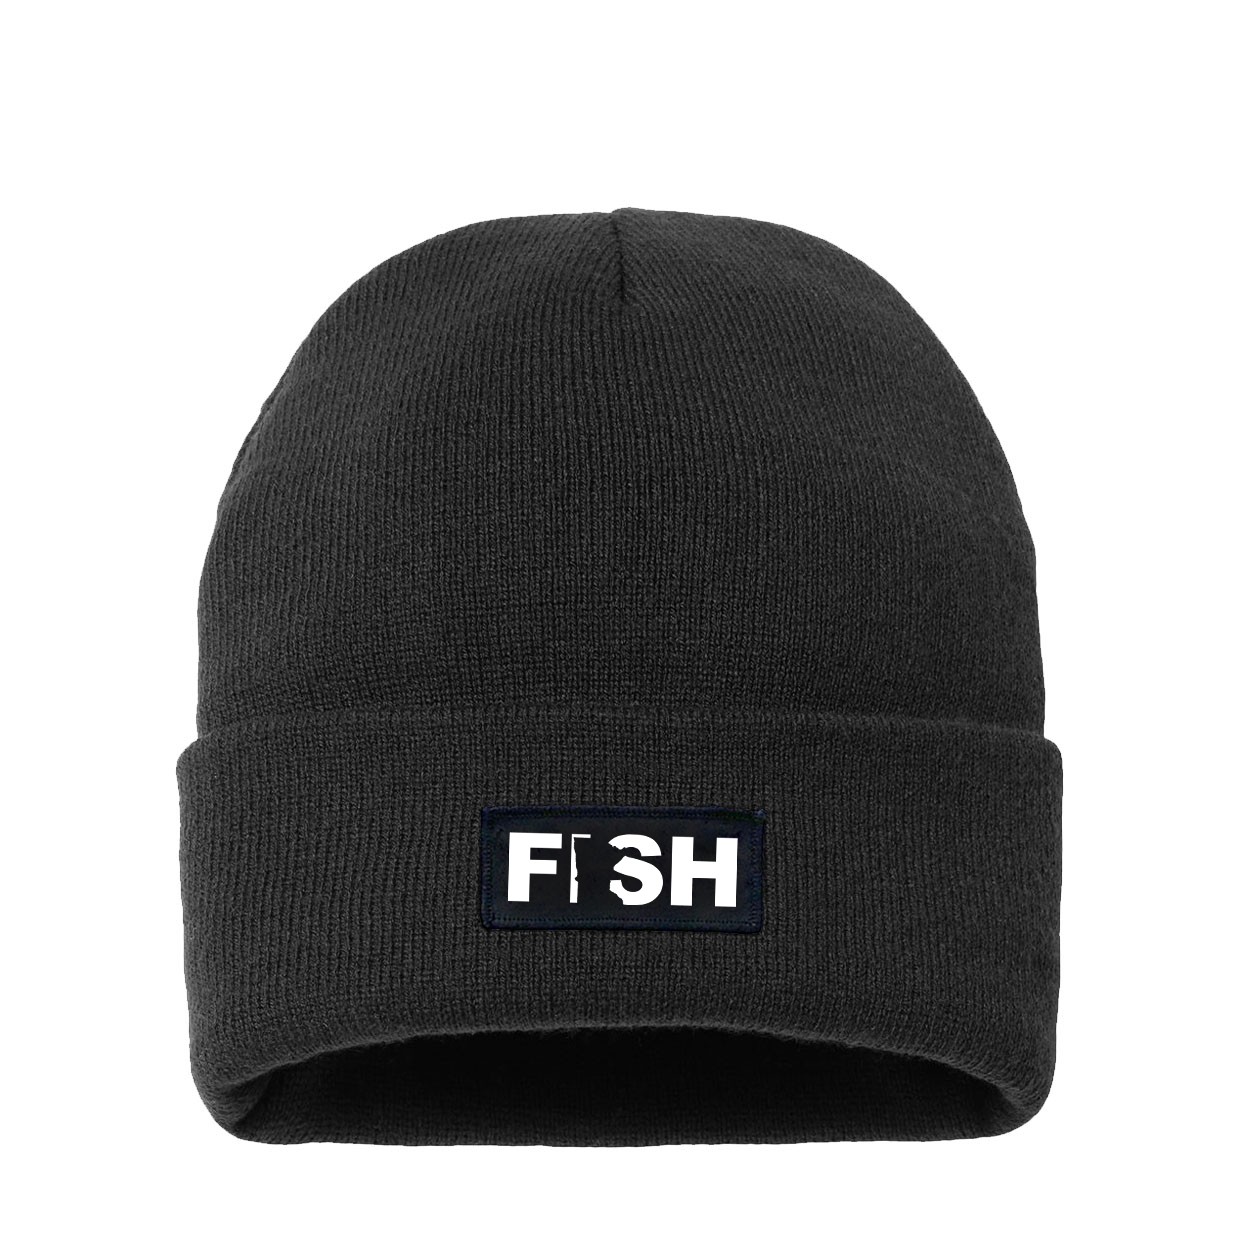 Fish Minnesota Night Out Woven Patch Night Out Sherpa Lined Cuffed Beanie Black (White Logo)